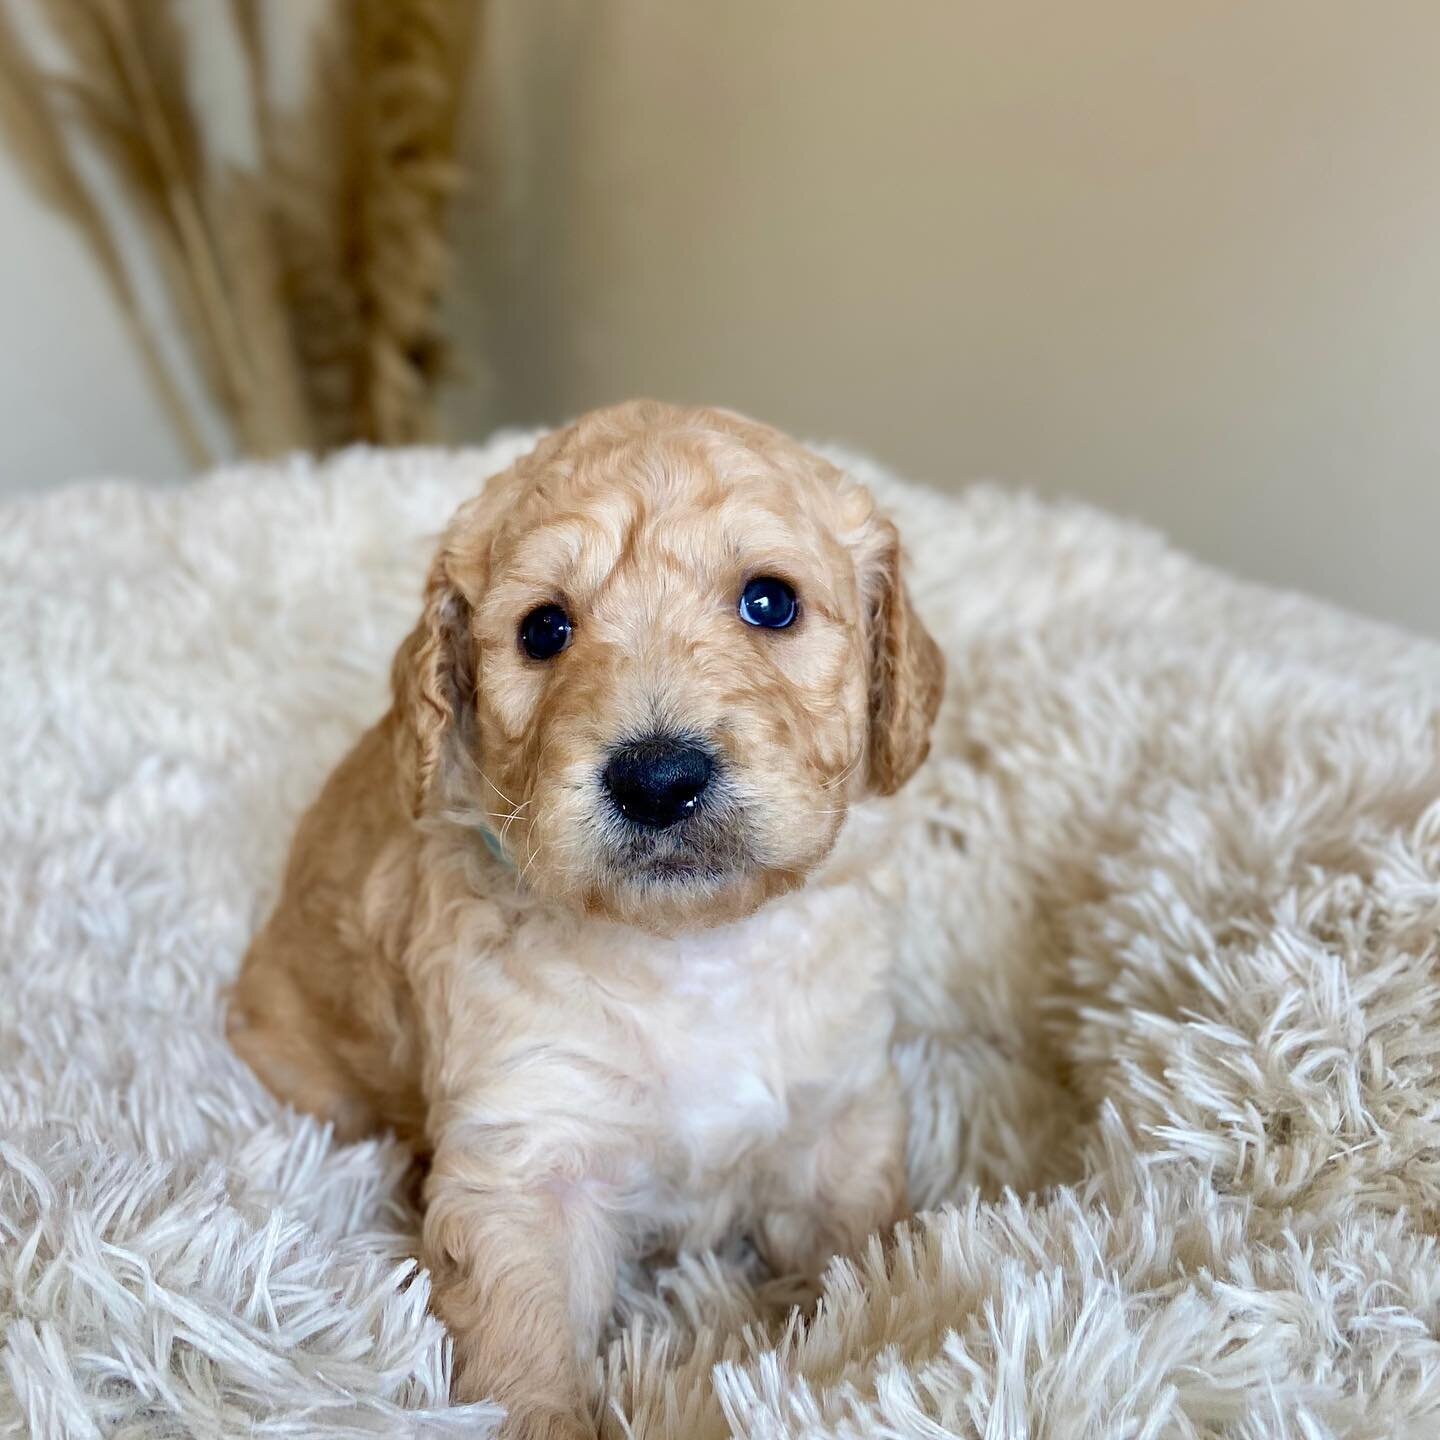 Sammys Christmas puppies Five weeks tomorrow? Can you handle the adorable little faces?!? #goldendoodlebreeder #Puppyculture #puppyculturebreeder #f2bgoldendoodle #goldendoodle #californiagoldendoodles #goldendoodlesofcalifornia #goldendoodlesofinsta